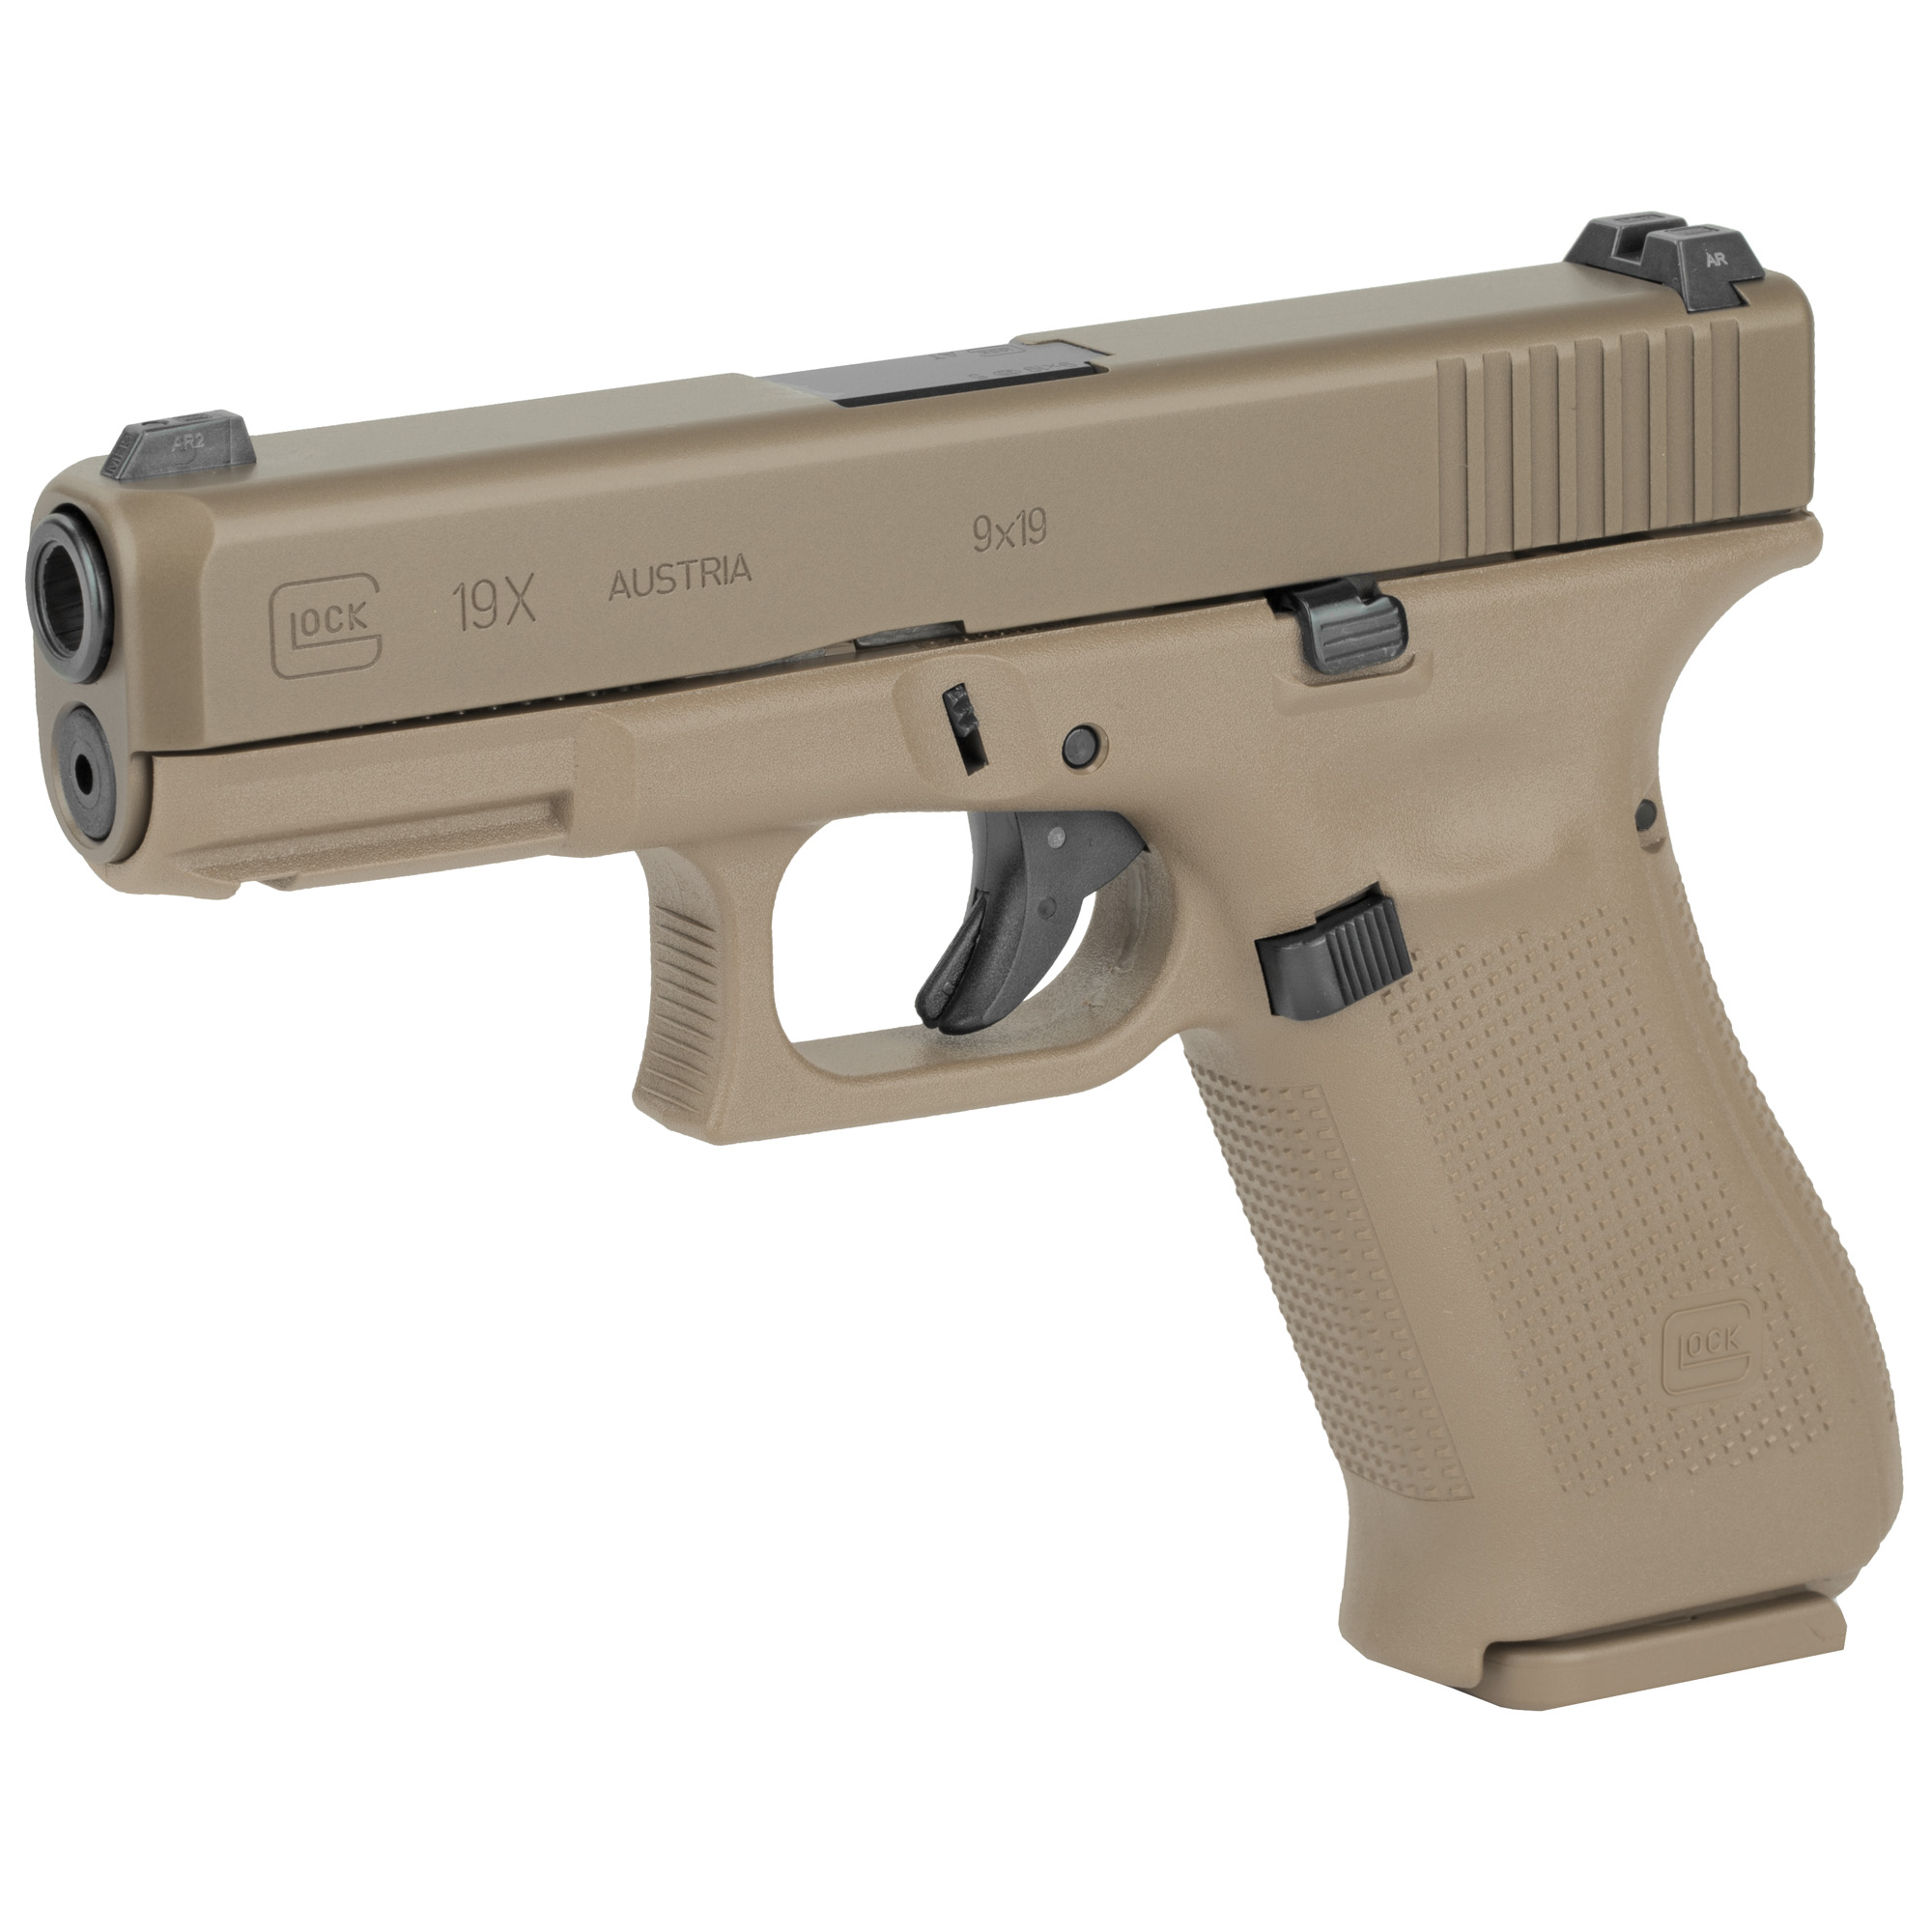 Glock, 19X, Striker Fired, Semi-automatic, Polymer Frame Pistol, Compact, 9MM, 4.02" Barrel, Glock Marksman Barrel, nPVD Finish, Coyote, No Finger Grooves, Glock Night Sights, 19 Rounds, 3 Magazines, (2)-19 Rounds